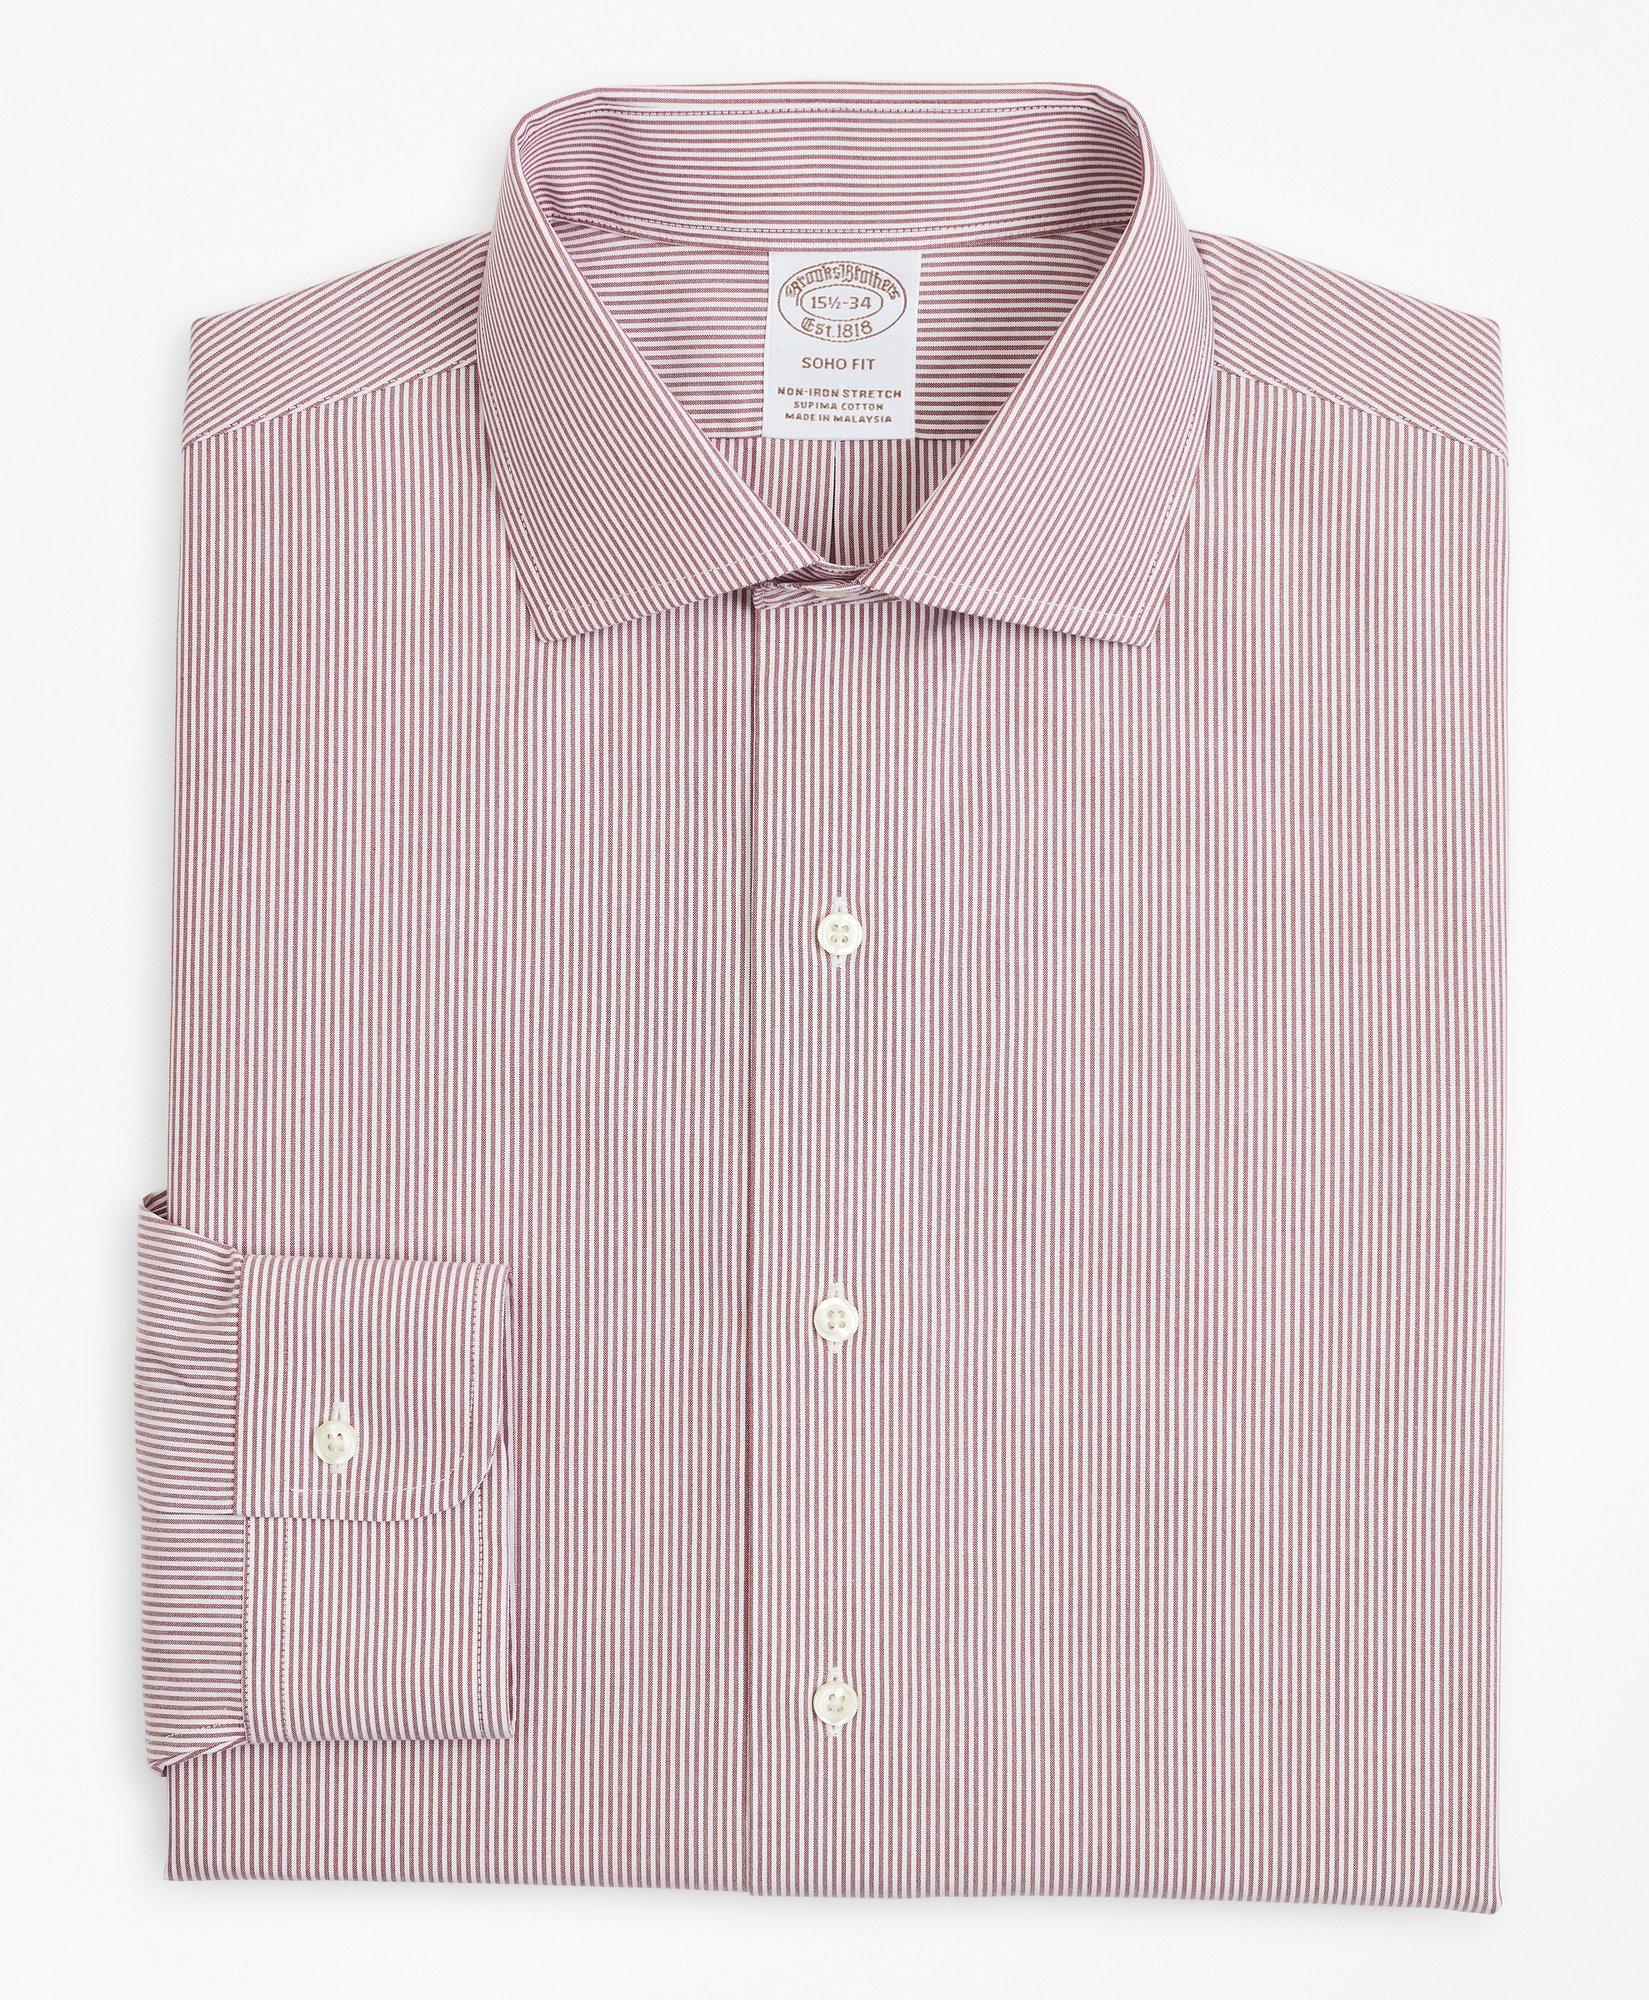 Men's Extra Slim Fit Button-Down Shirts